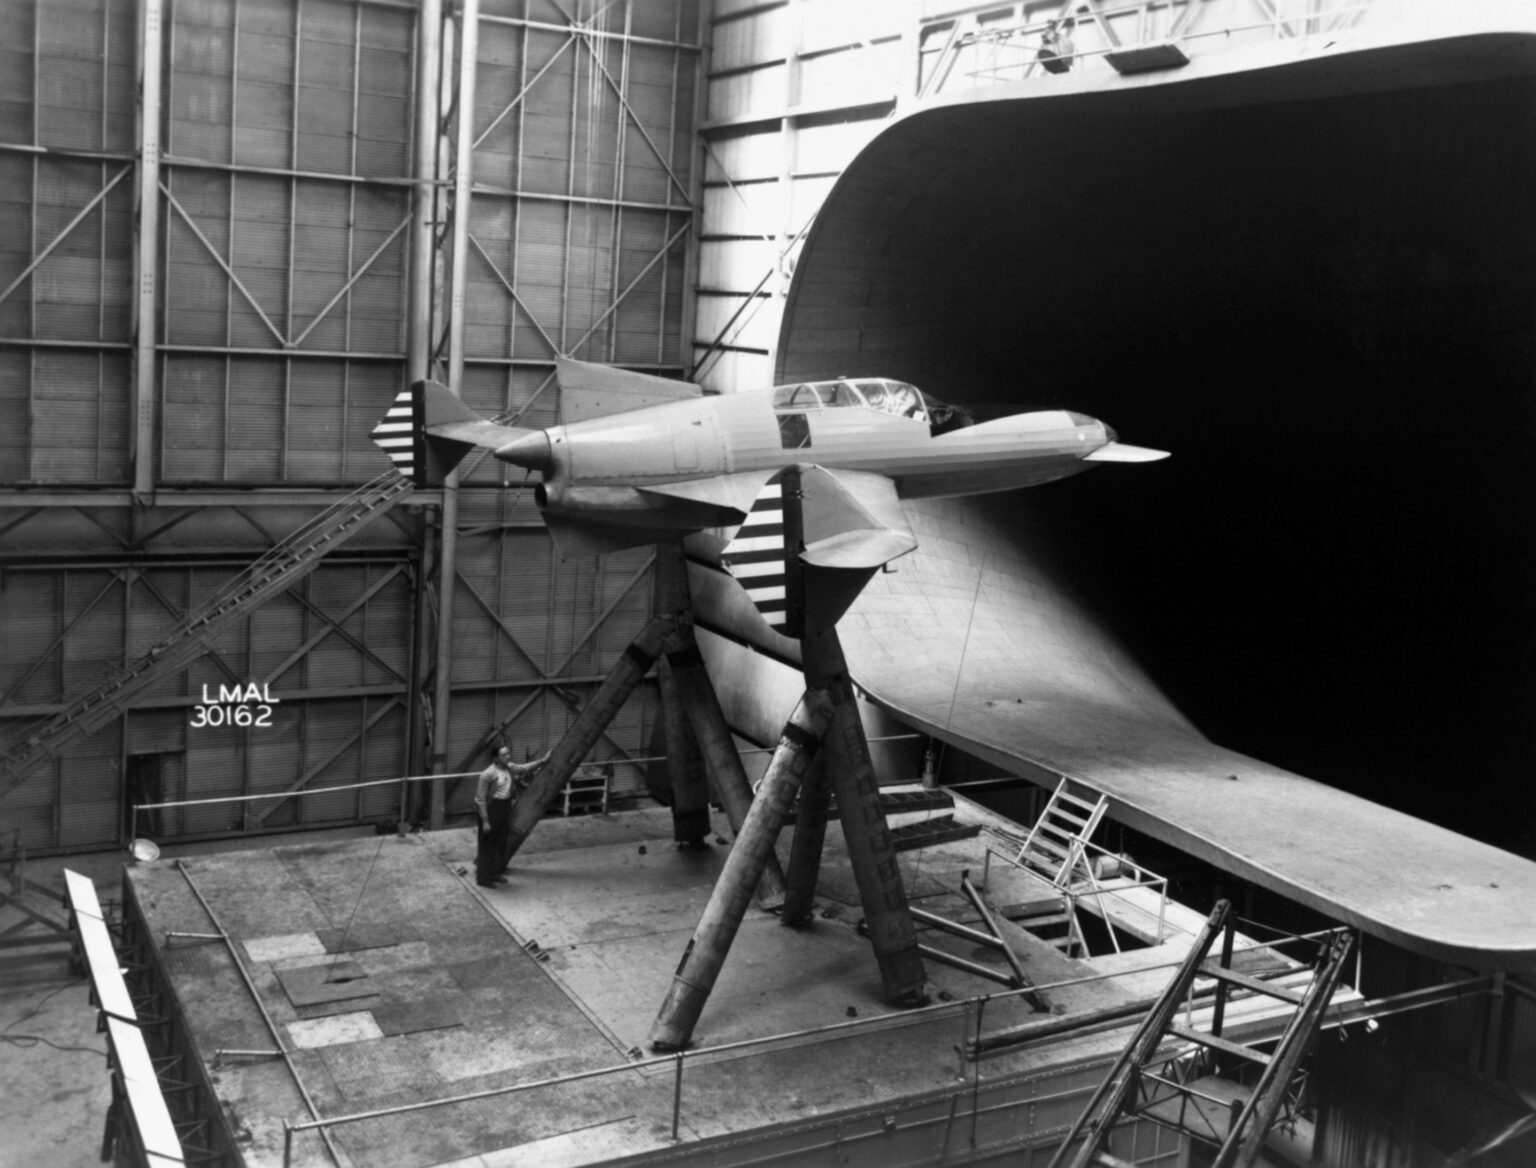 The Brief and Unconventional Life of the Curtiss XP-55 Ascender!